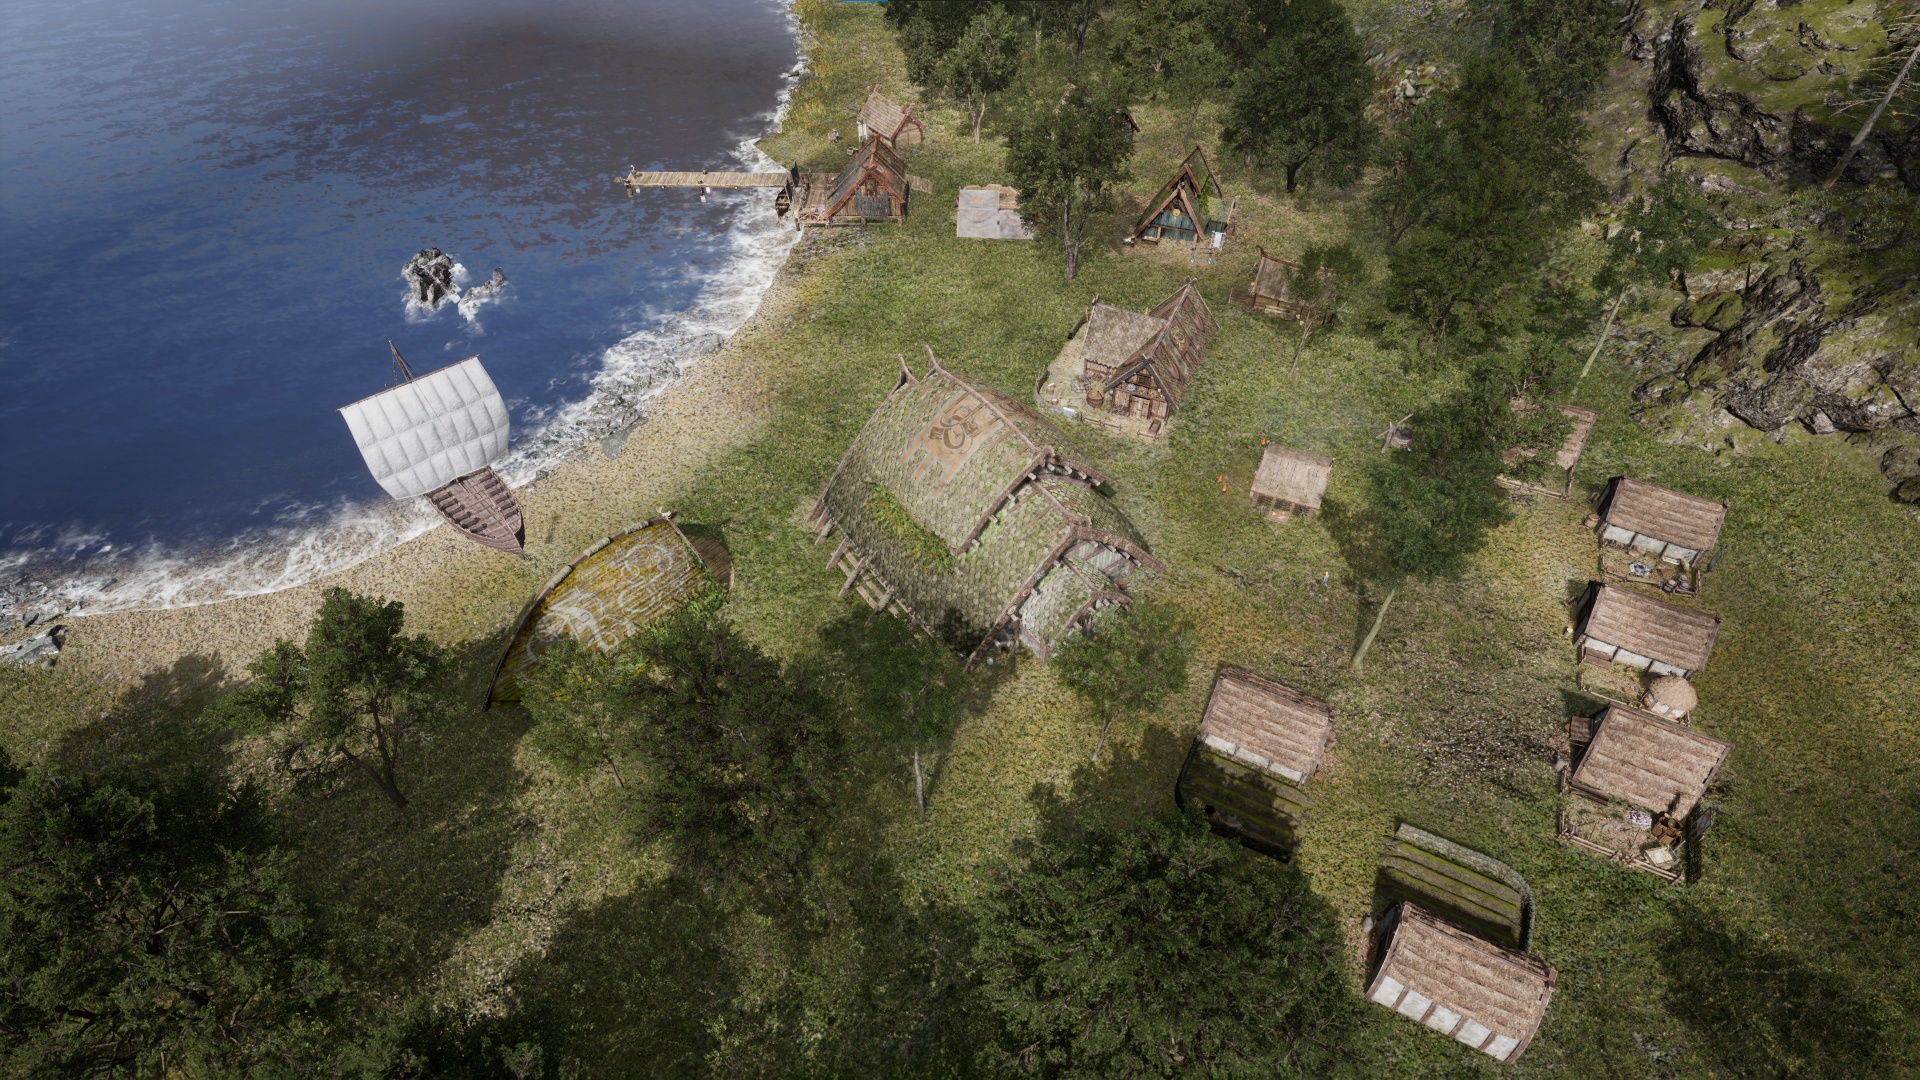 (A Viking settlement needs a lot of things: mead hall, houses, notes, workshops and of course ships!)